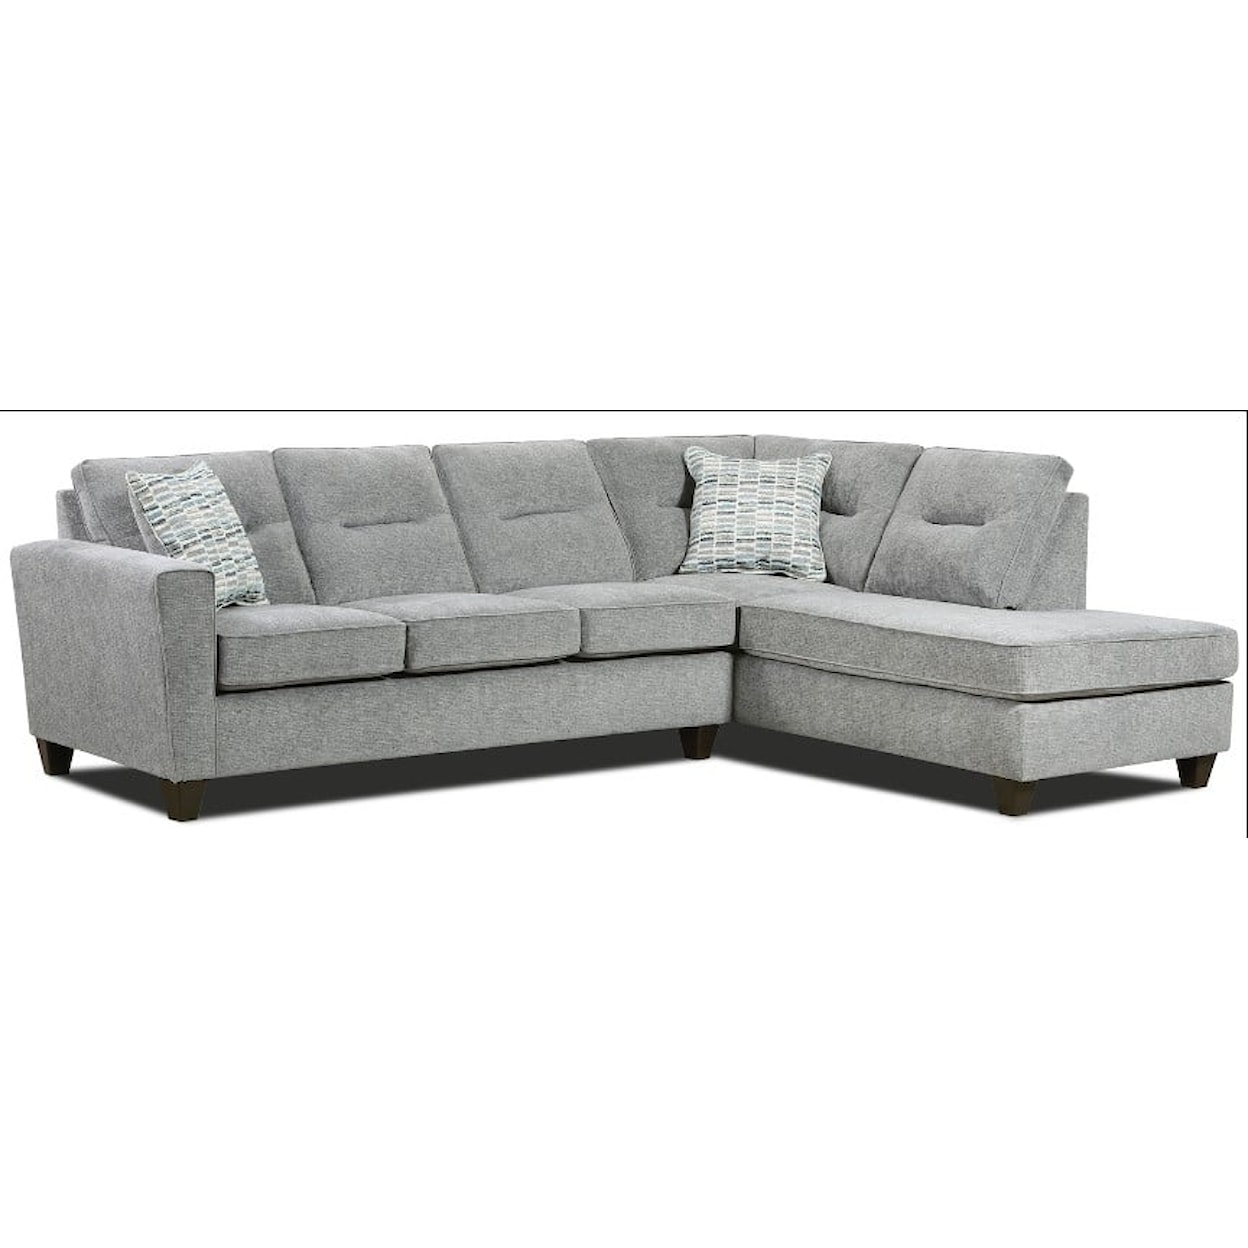 Fusion Furniture 6002 EVERLEIGH 2-Piece Sectional